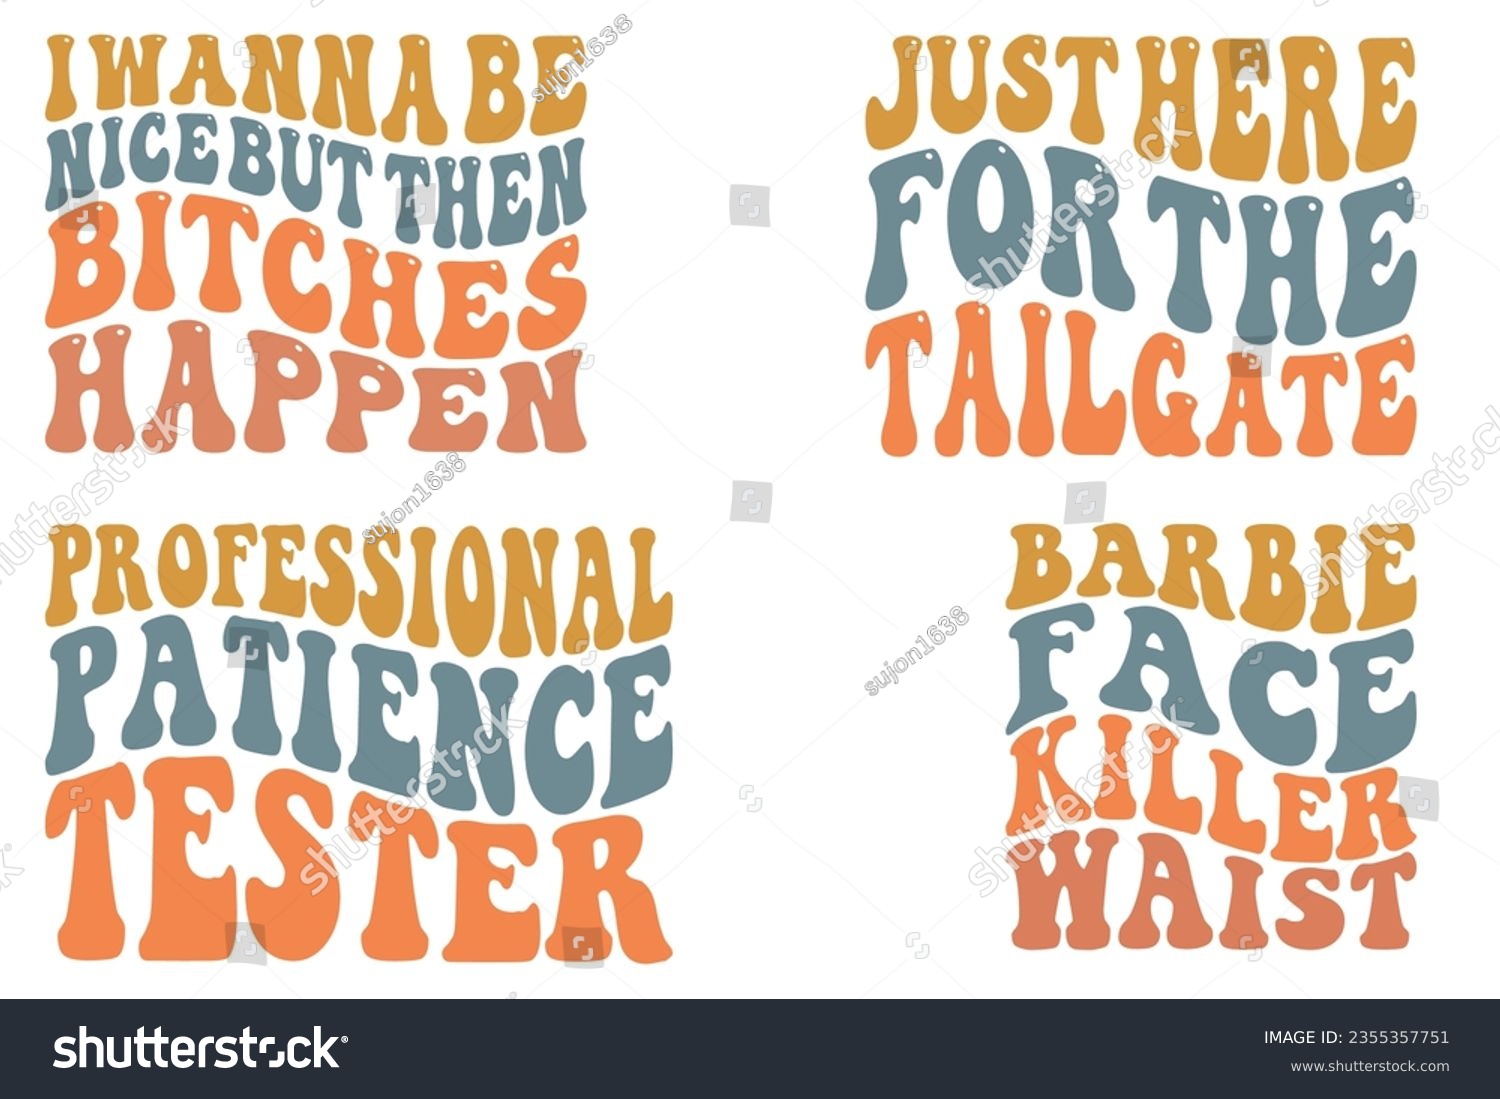 SVG of  I want to be nice, but then bitches happen, just here for the tailgate, Professional Patience Tester, Barbie Face Killer Waist retro wavy SVG bundle t-shirt svg